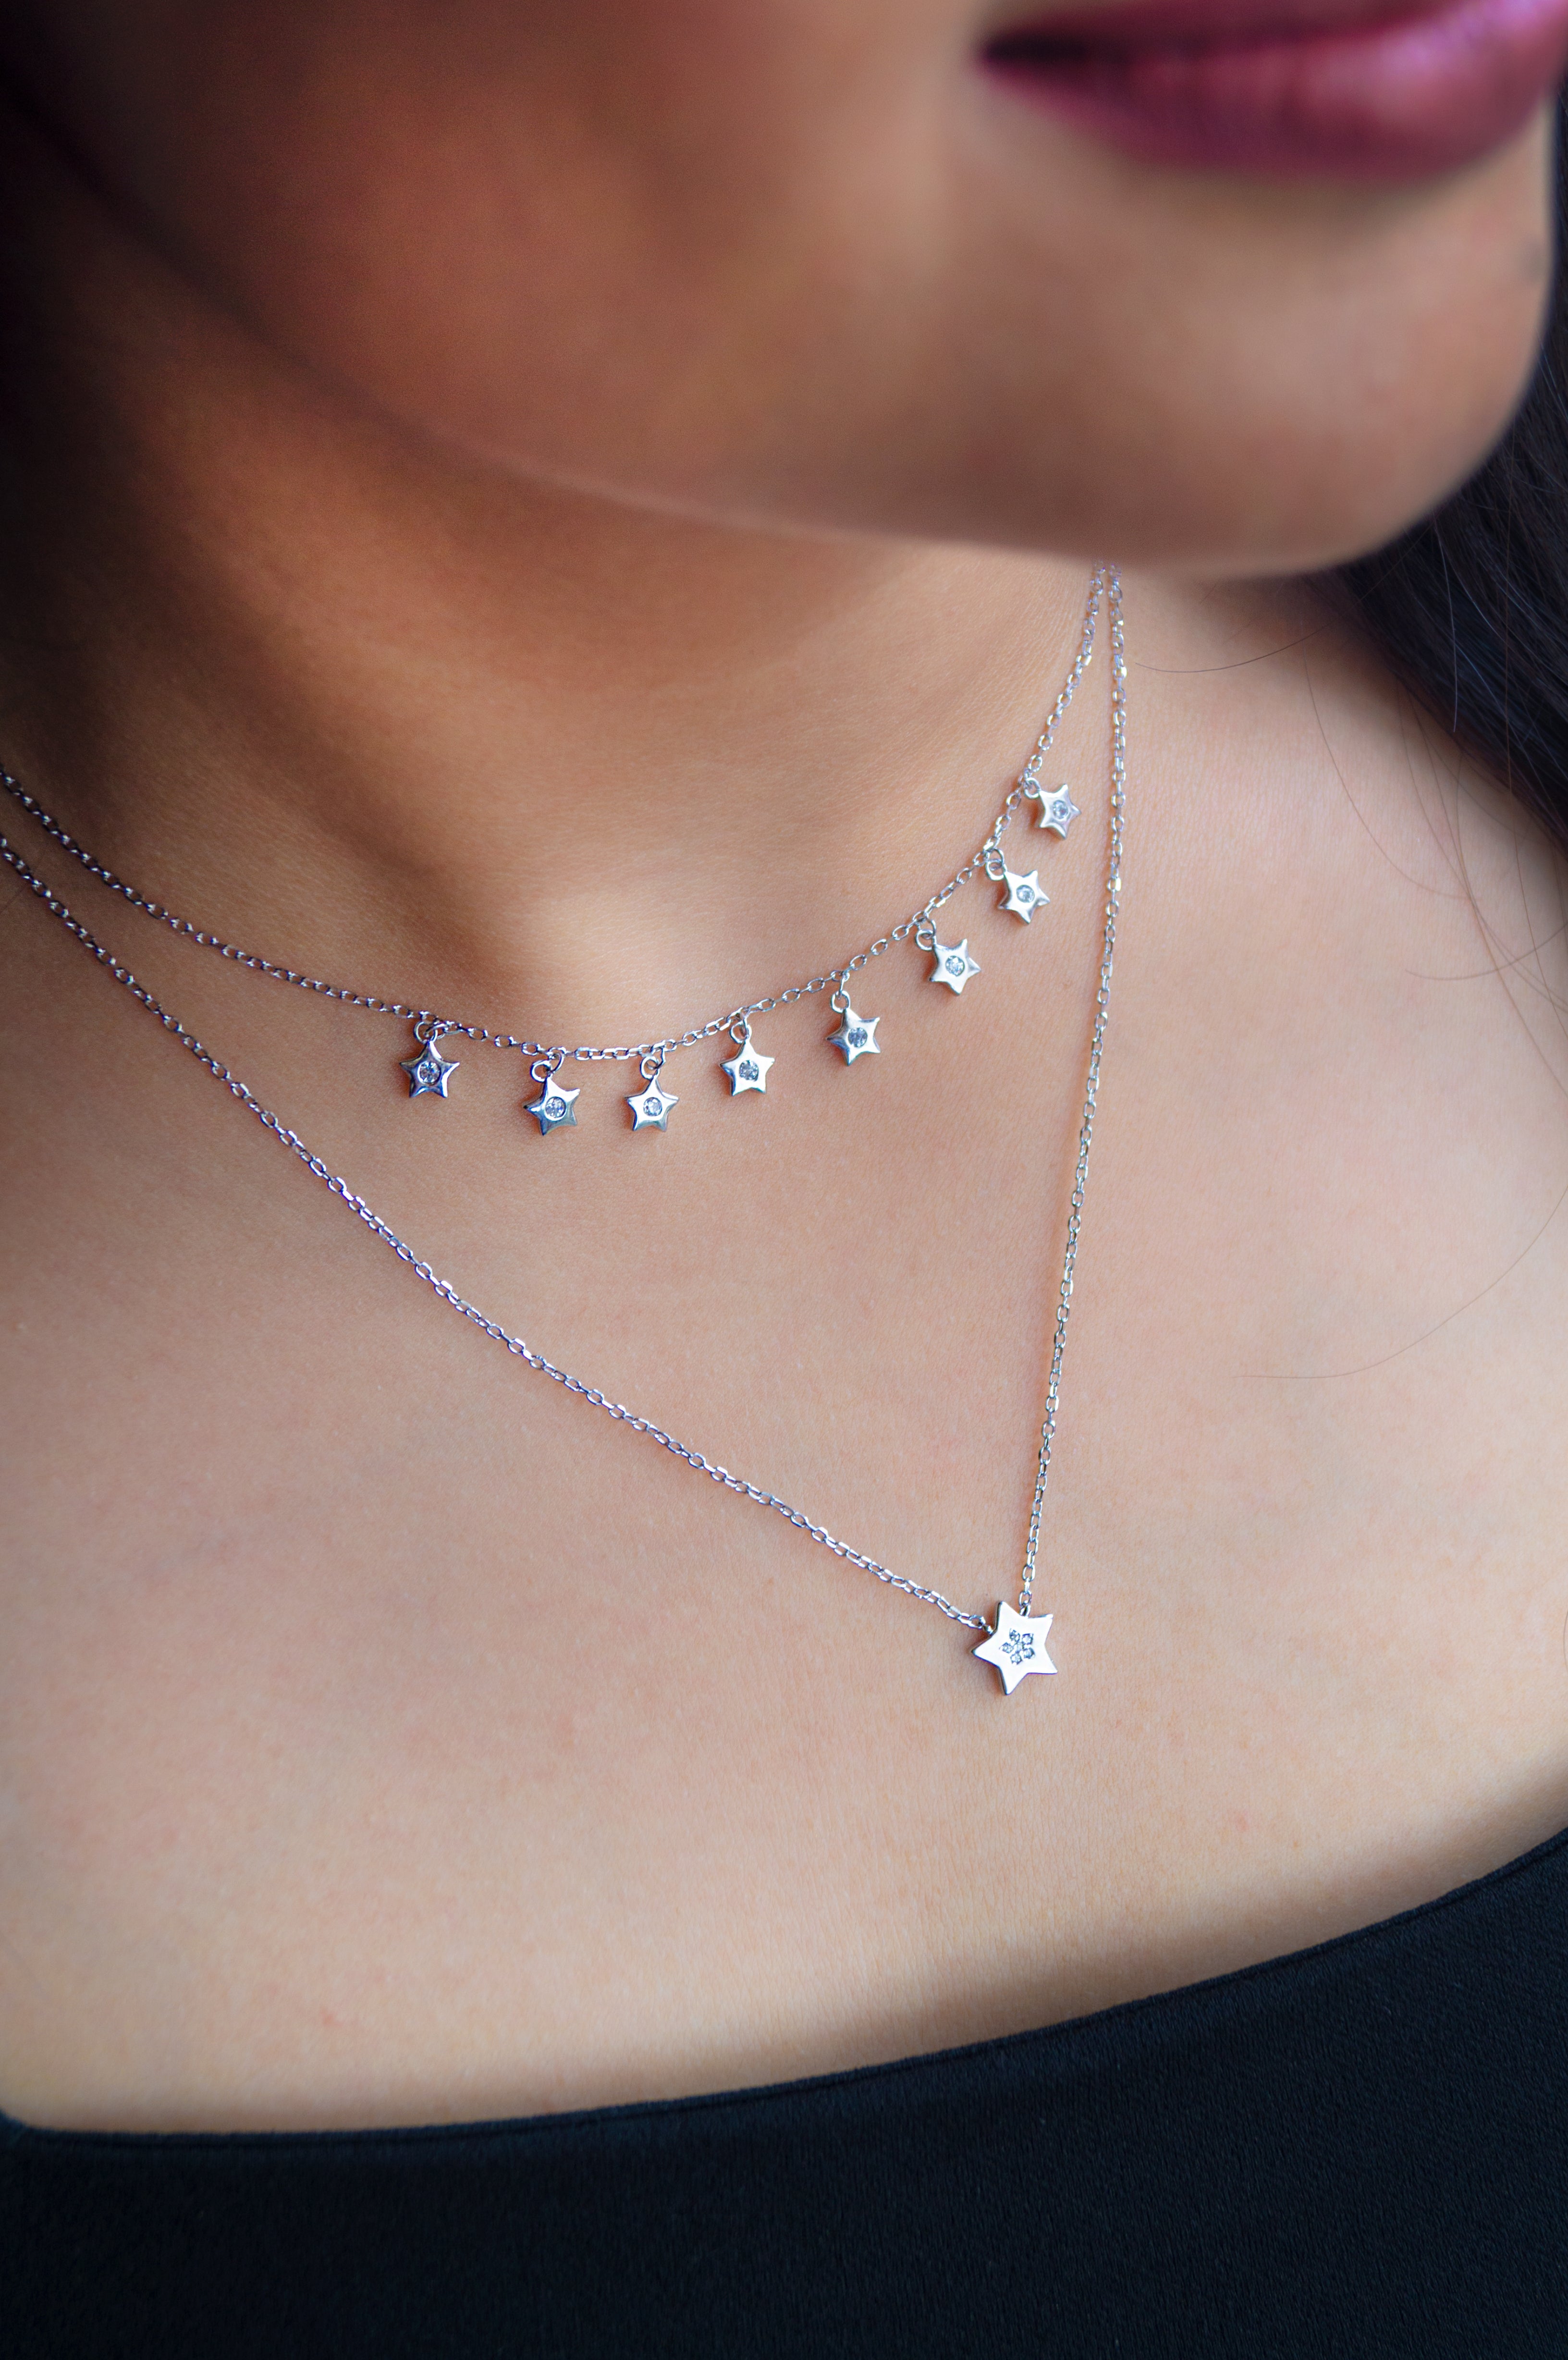 Buy Multilayer Starry Charm Delicate Sterling Silver Necklace by